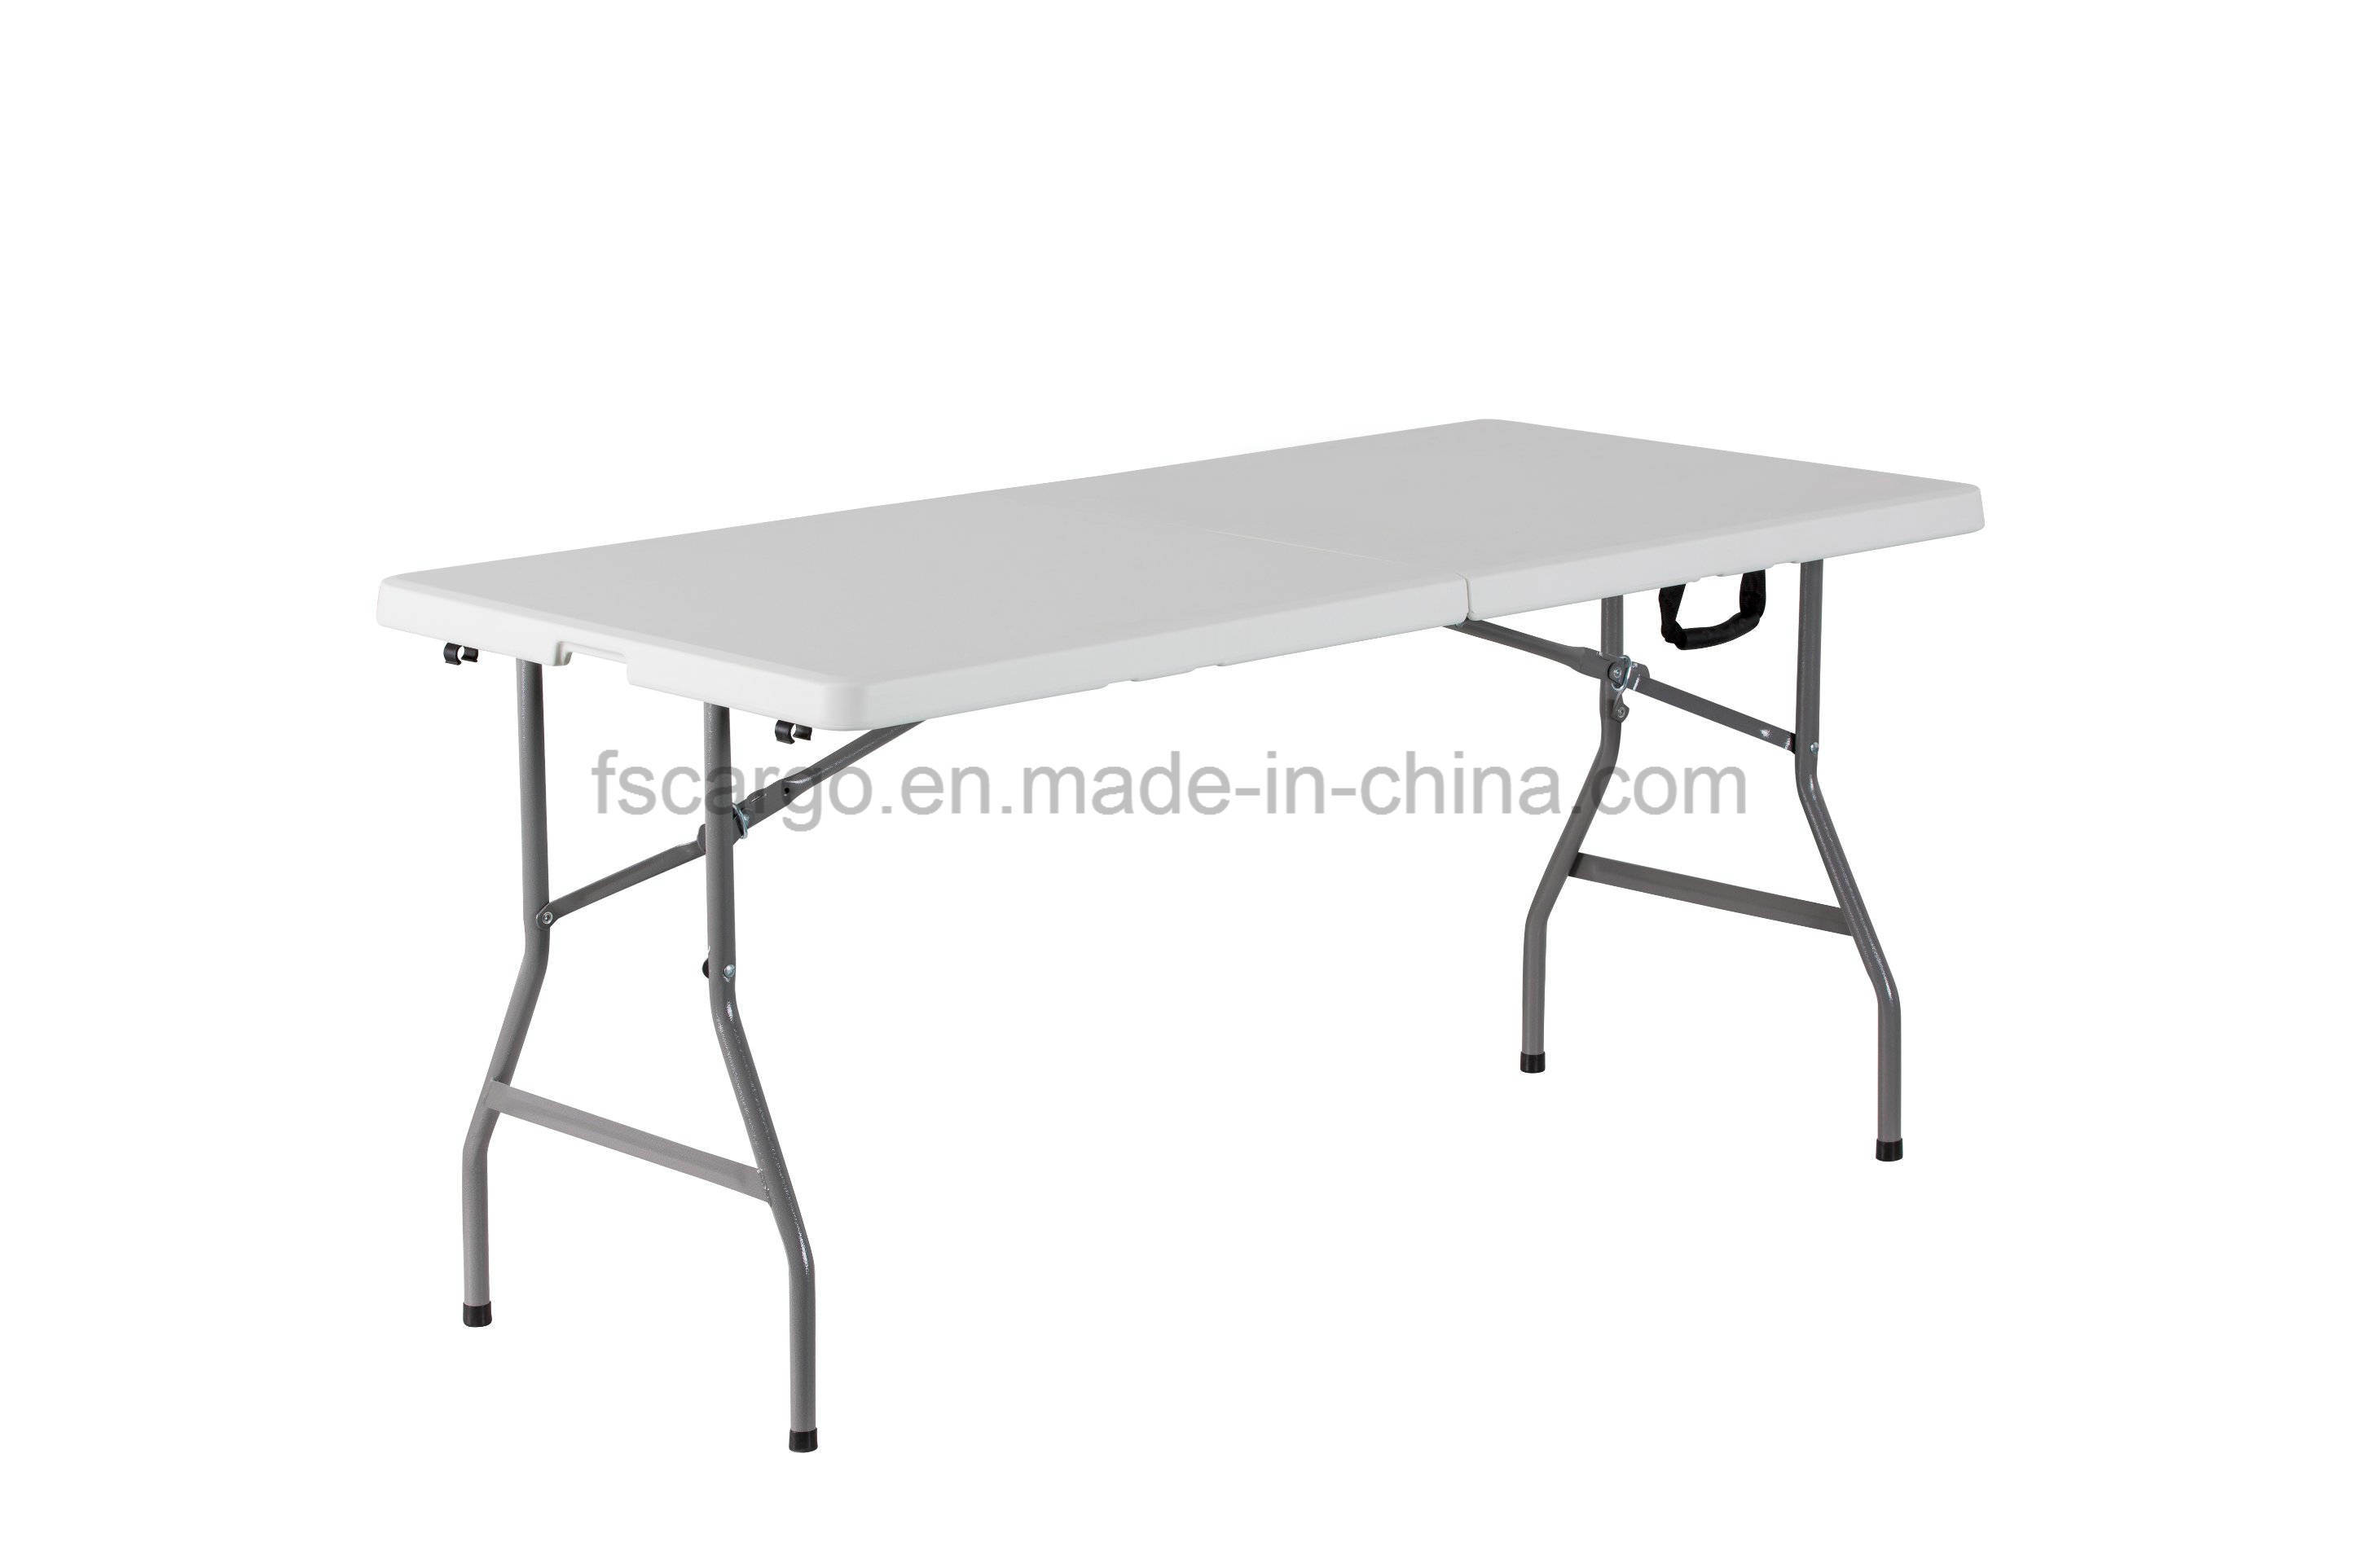 Hot Sell Plastic Half Folding Rectangular Table for Wedding Party Used (CG-Z180)